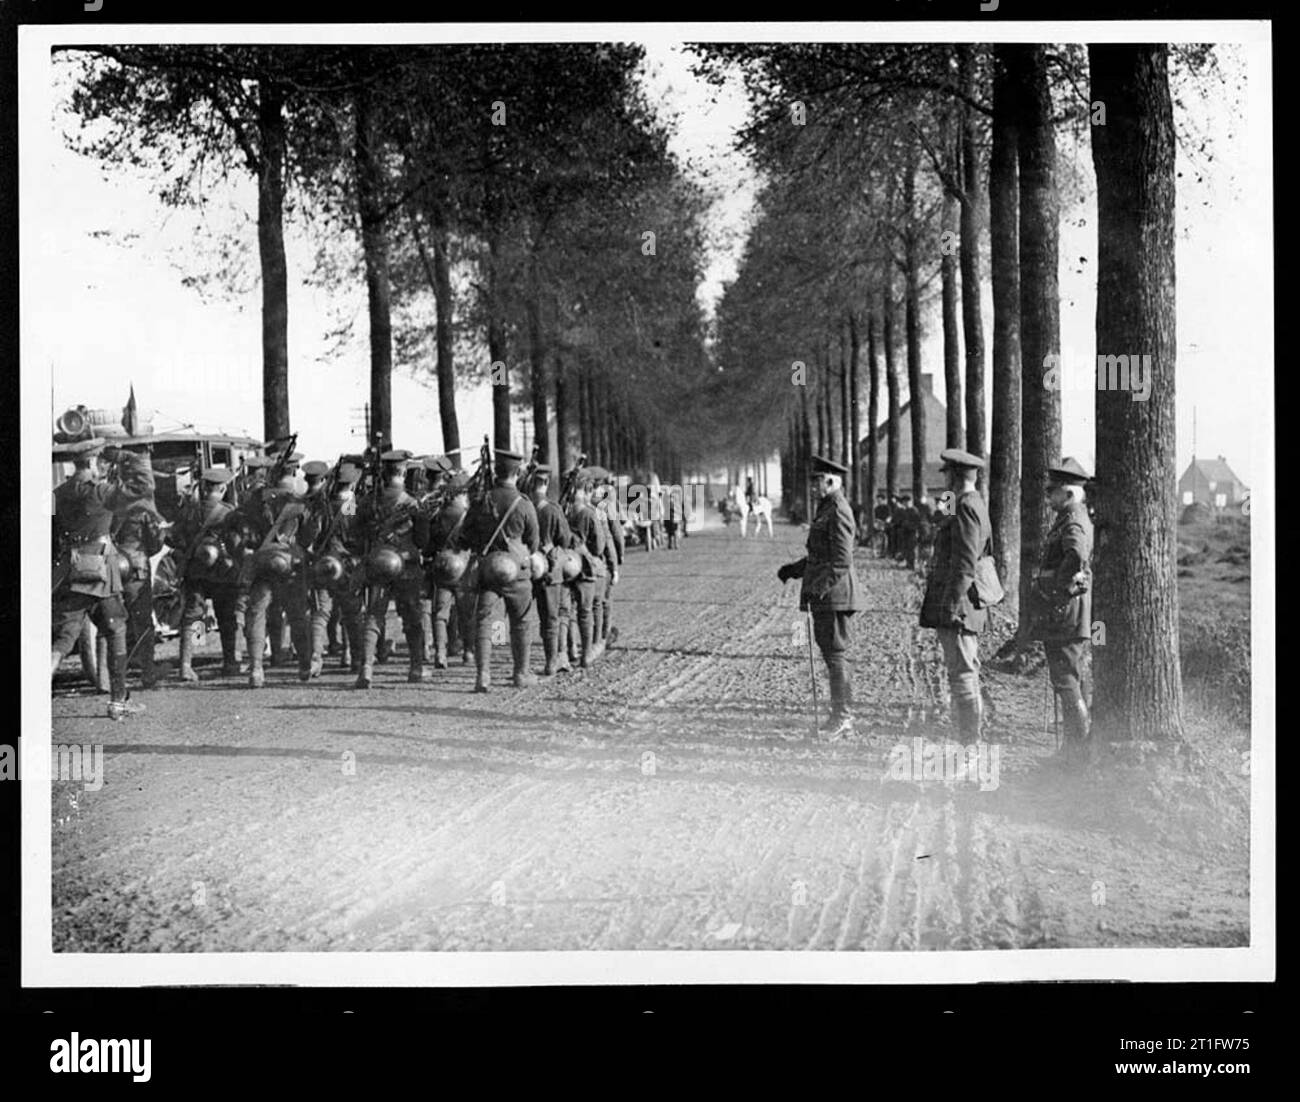 Photographs of royal visits to the Western Front. Royal visits were seen as an important way of boosting morale. Irish troops march along a dusty tree-lined road. Some of the troops are playing the bagpipes. Onlookers watch from the side of the road. In the distance are a number of vehicles and a man on a grey horse. The Duke of Connaught was Queen Victoria's third son. General Plumer was celebrated for leading the successful Battle of Messines Ridge in 1917. [Original reads: 'OFFICIAL PHOTOGRAPH TAKEN ON THE WESTERN FRONT - Irish troops march past the Duke of Connaught and General Sir Herbert Stock Photo